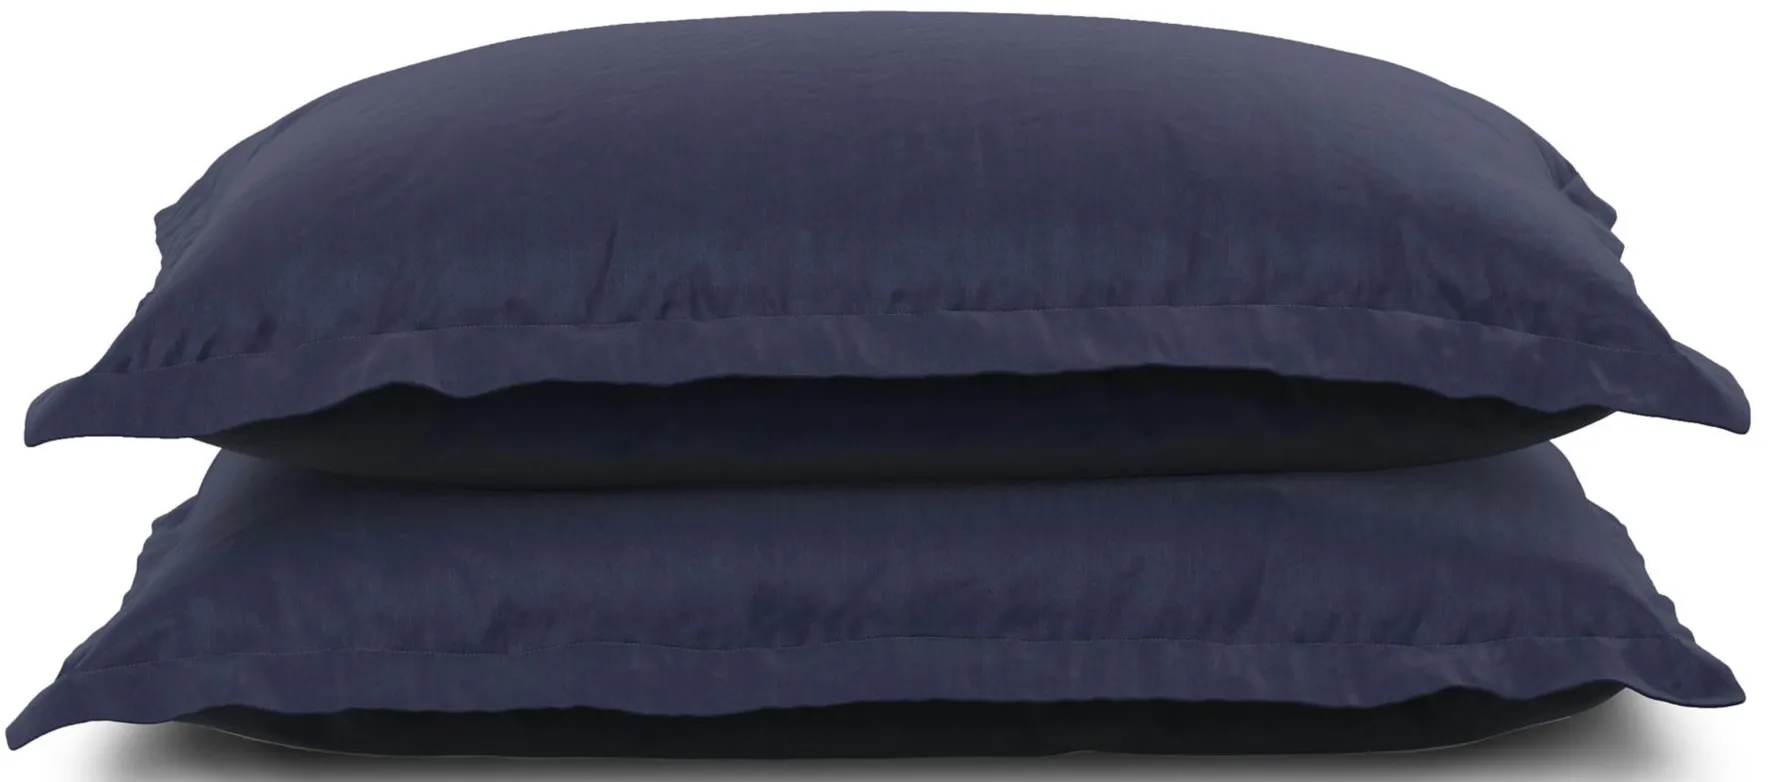 PureCare Dual-Sided Pillow Sham Set - Cooling + Bamboo in Midnight / Celestial by PureCare